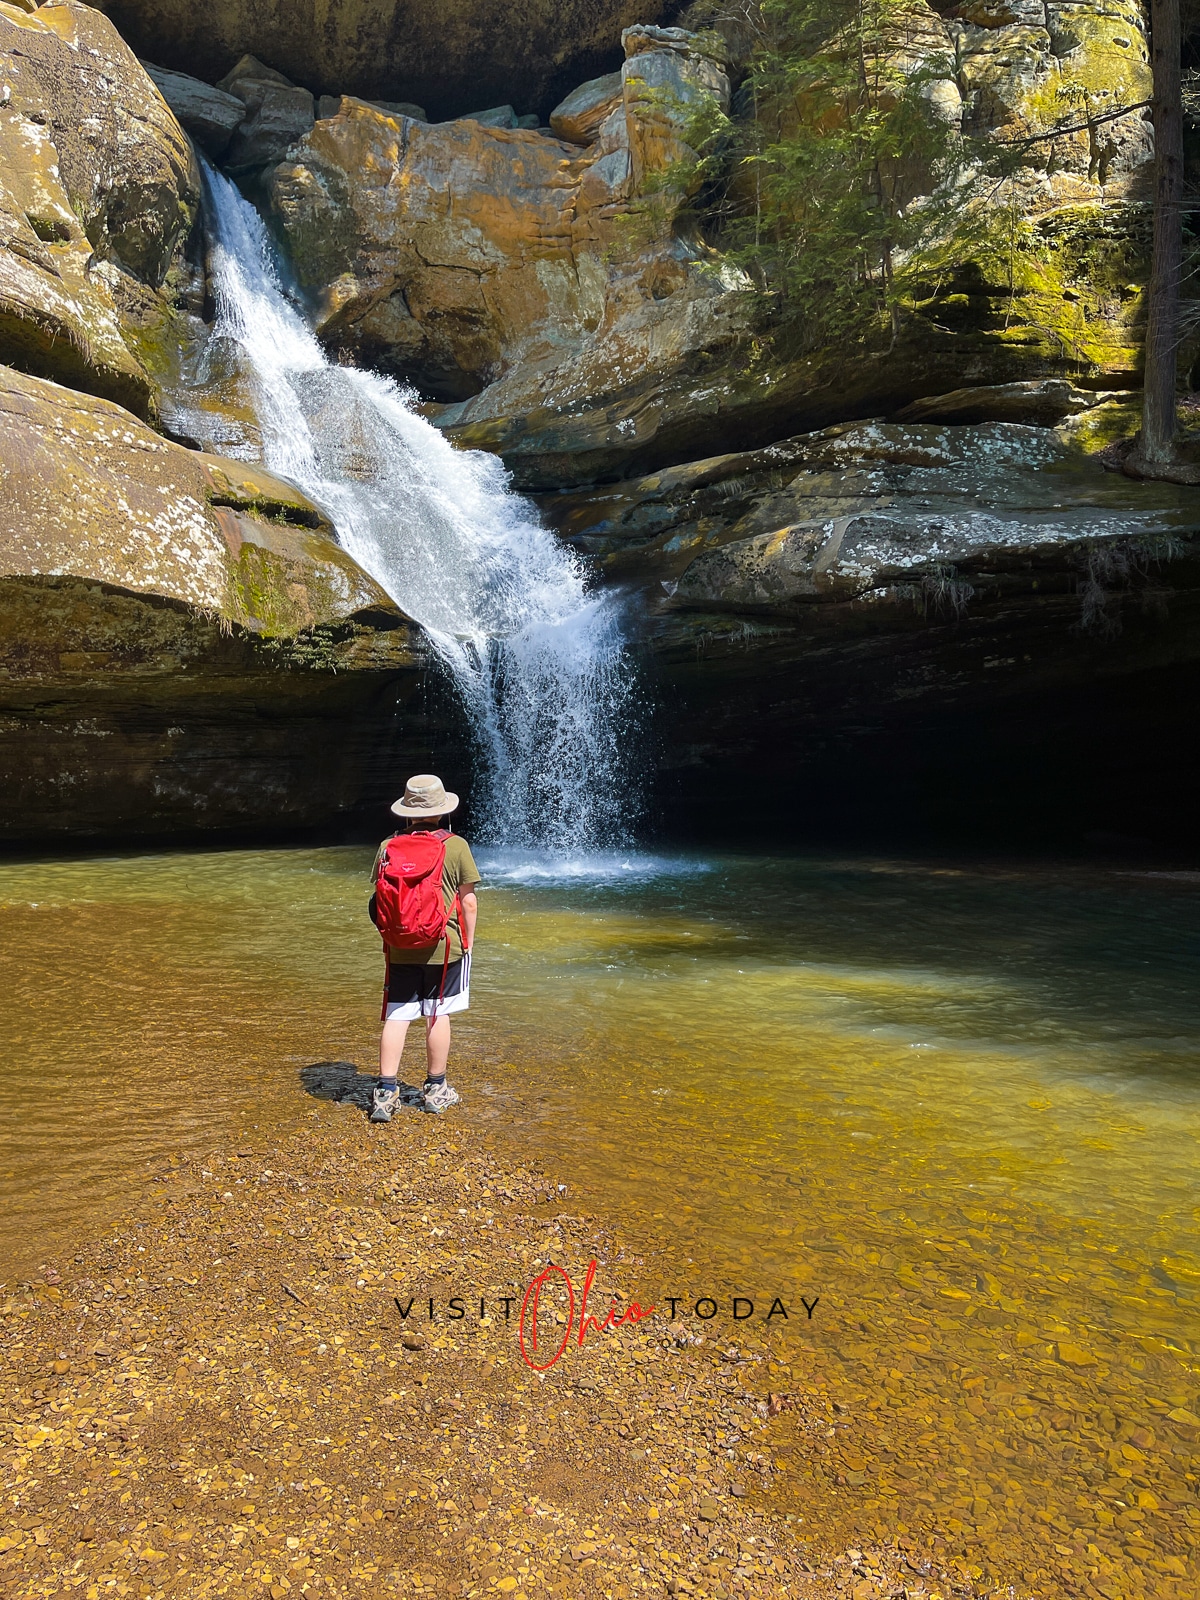 unobstructed view of cedar falls waterfall, water flowing down rocks into a clear pool, person with shorts, a red backpack and hat standing facing the waterfall